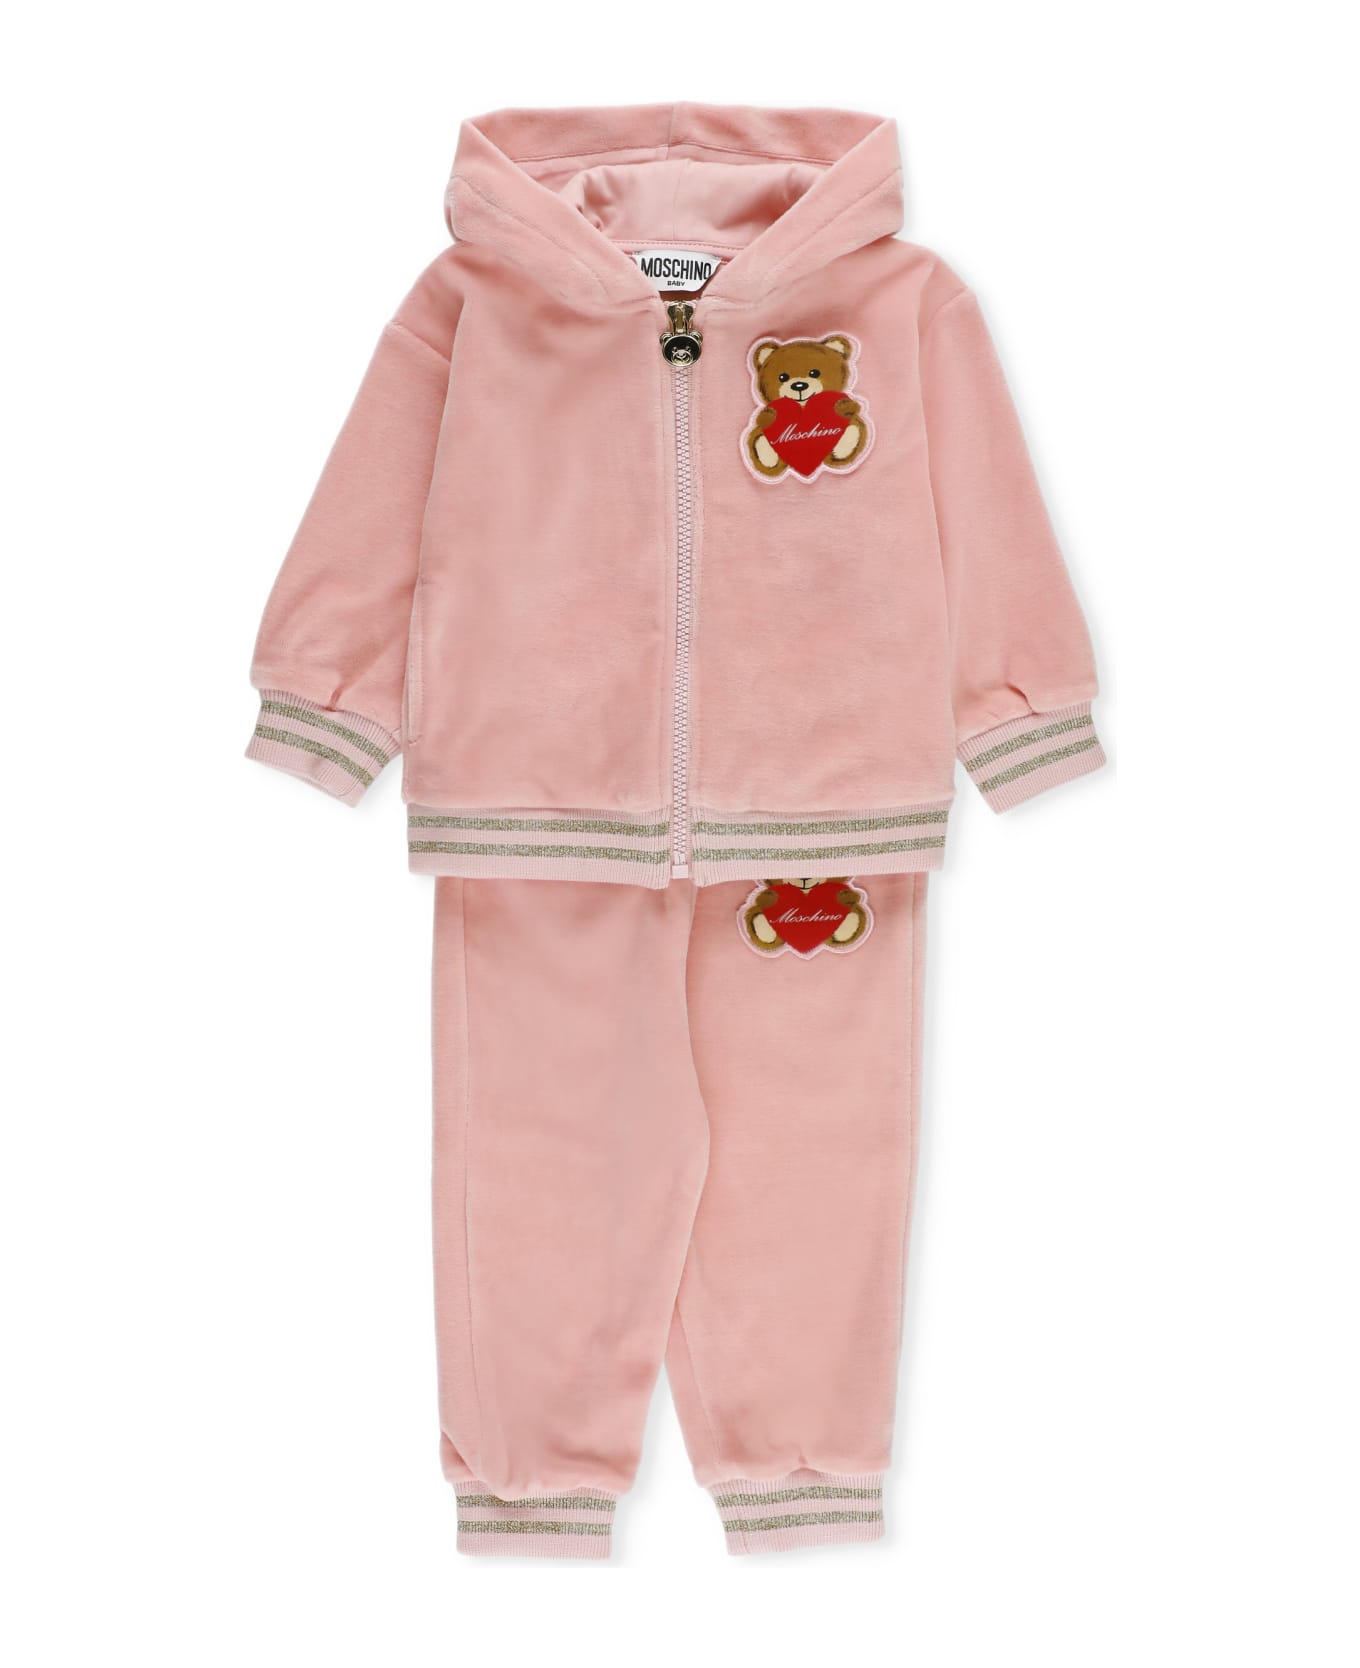 Moschino Teddy Two-piece Set - Pink ボディスーツ＆セットアップ